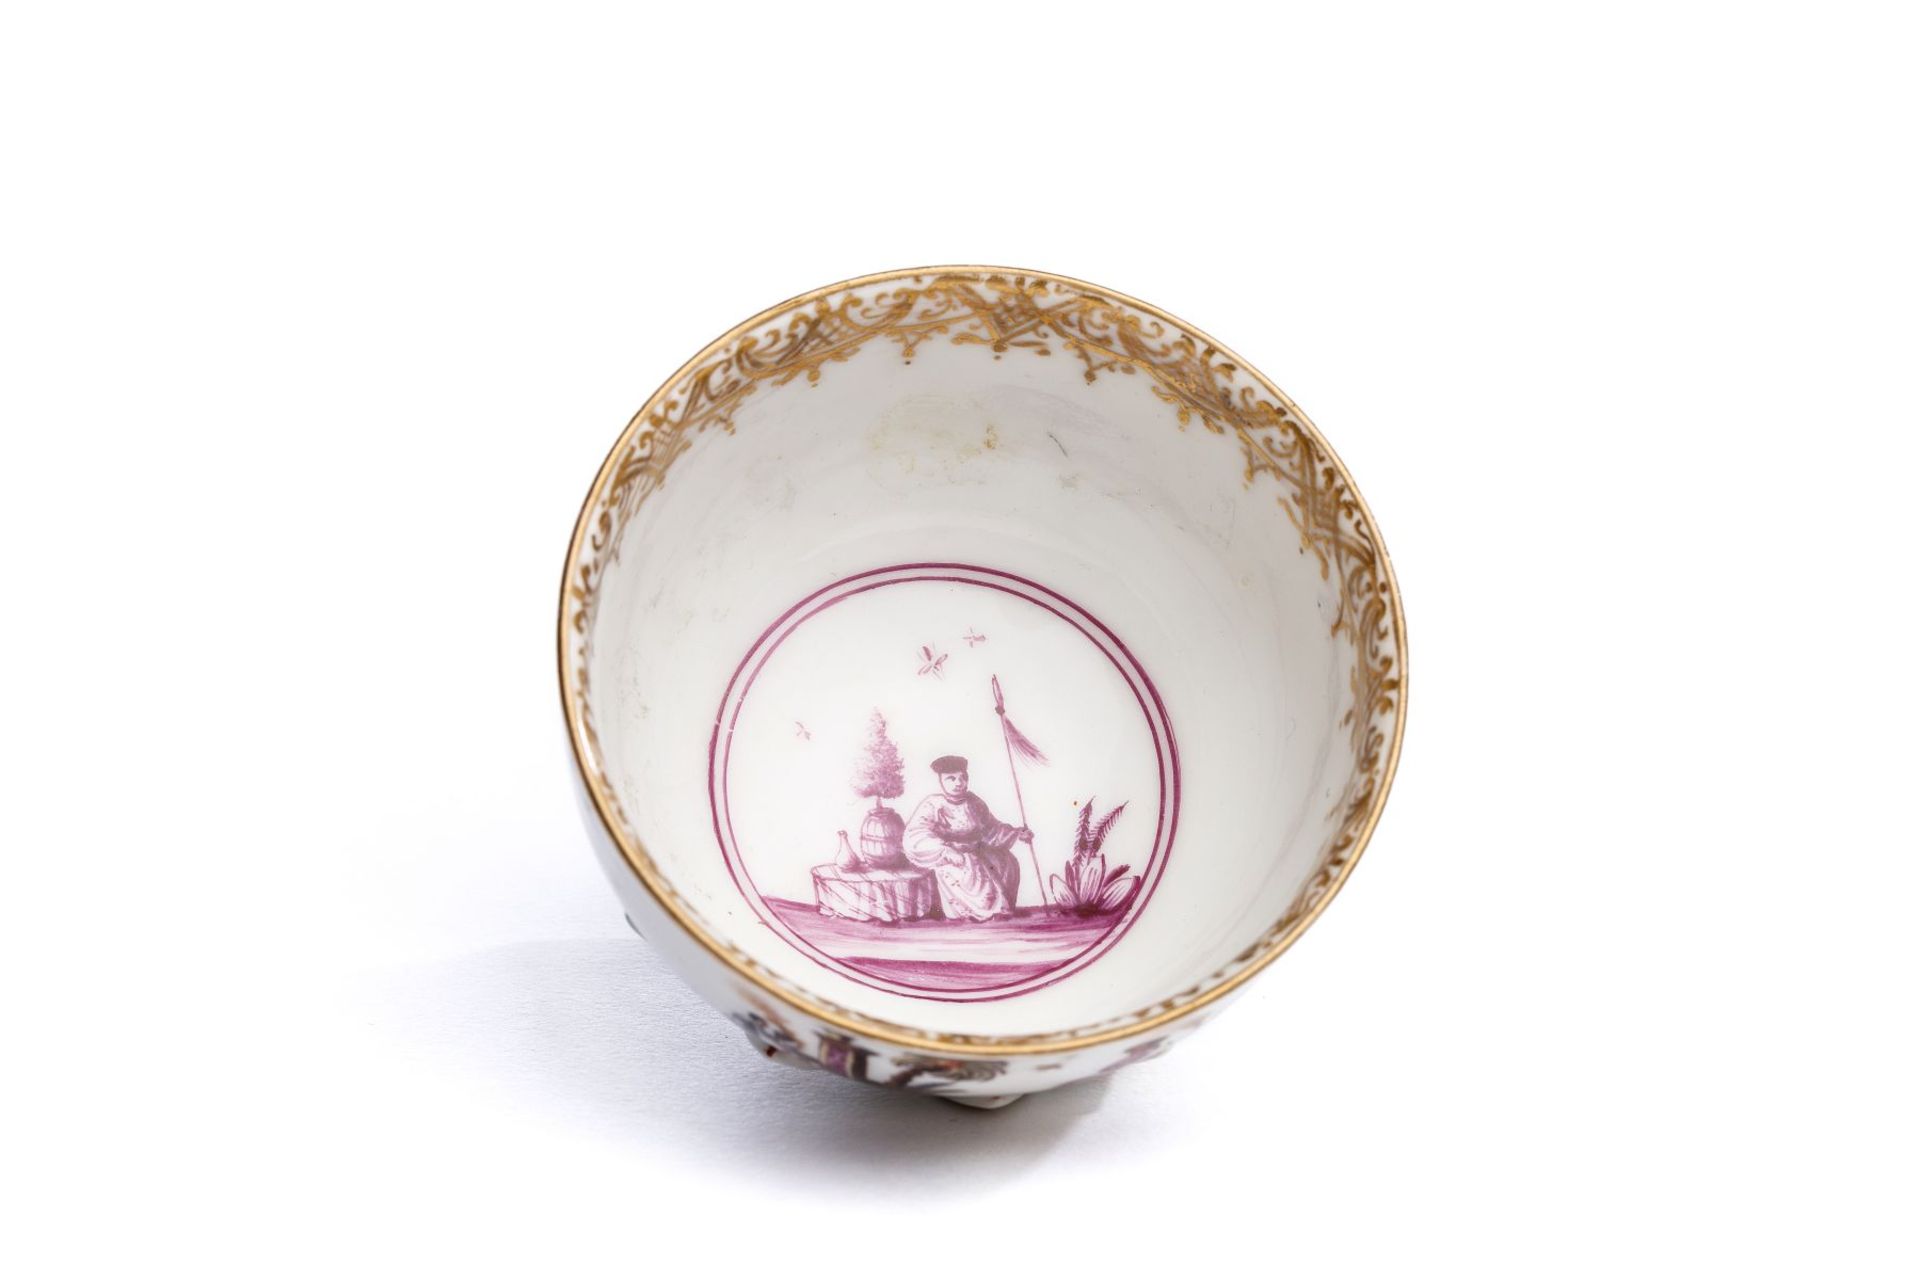 Bowl without Saucer, Meissen 1739 - Image 4 of 4